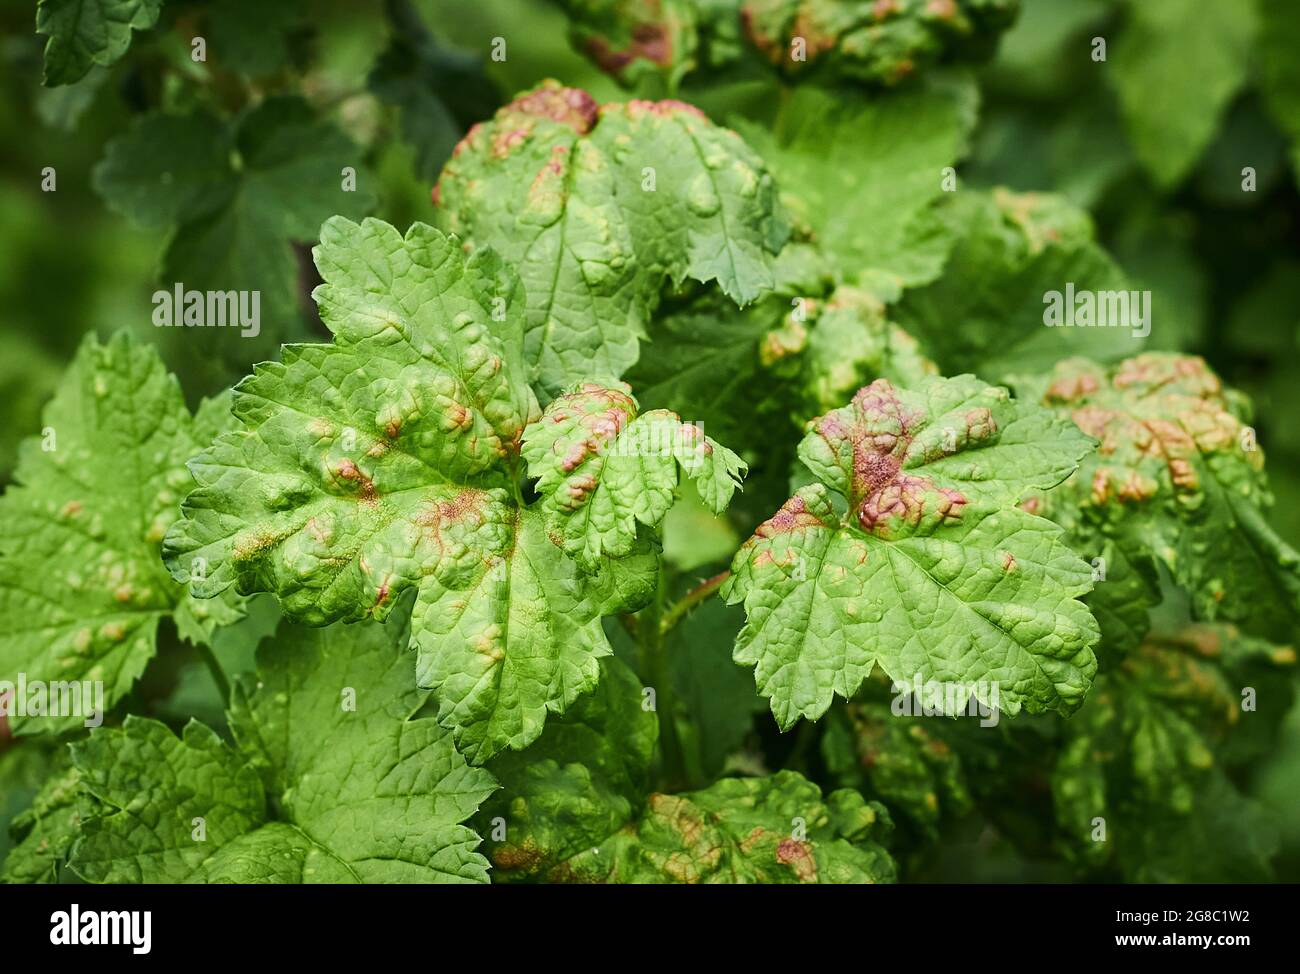 Peach leaf curl on currant leaves. Common Plant Diseases. Puckered or blistered leaves distorted by pale yellow aphids. Man holding reddish or Stock Photo